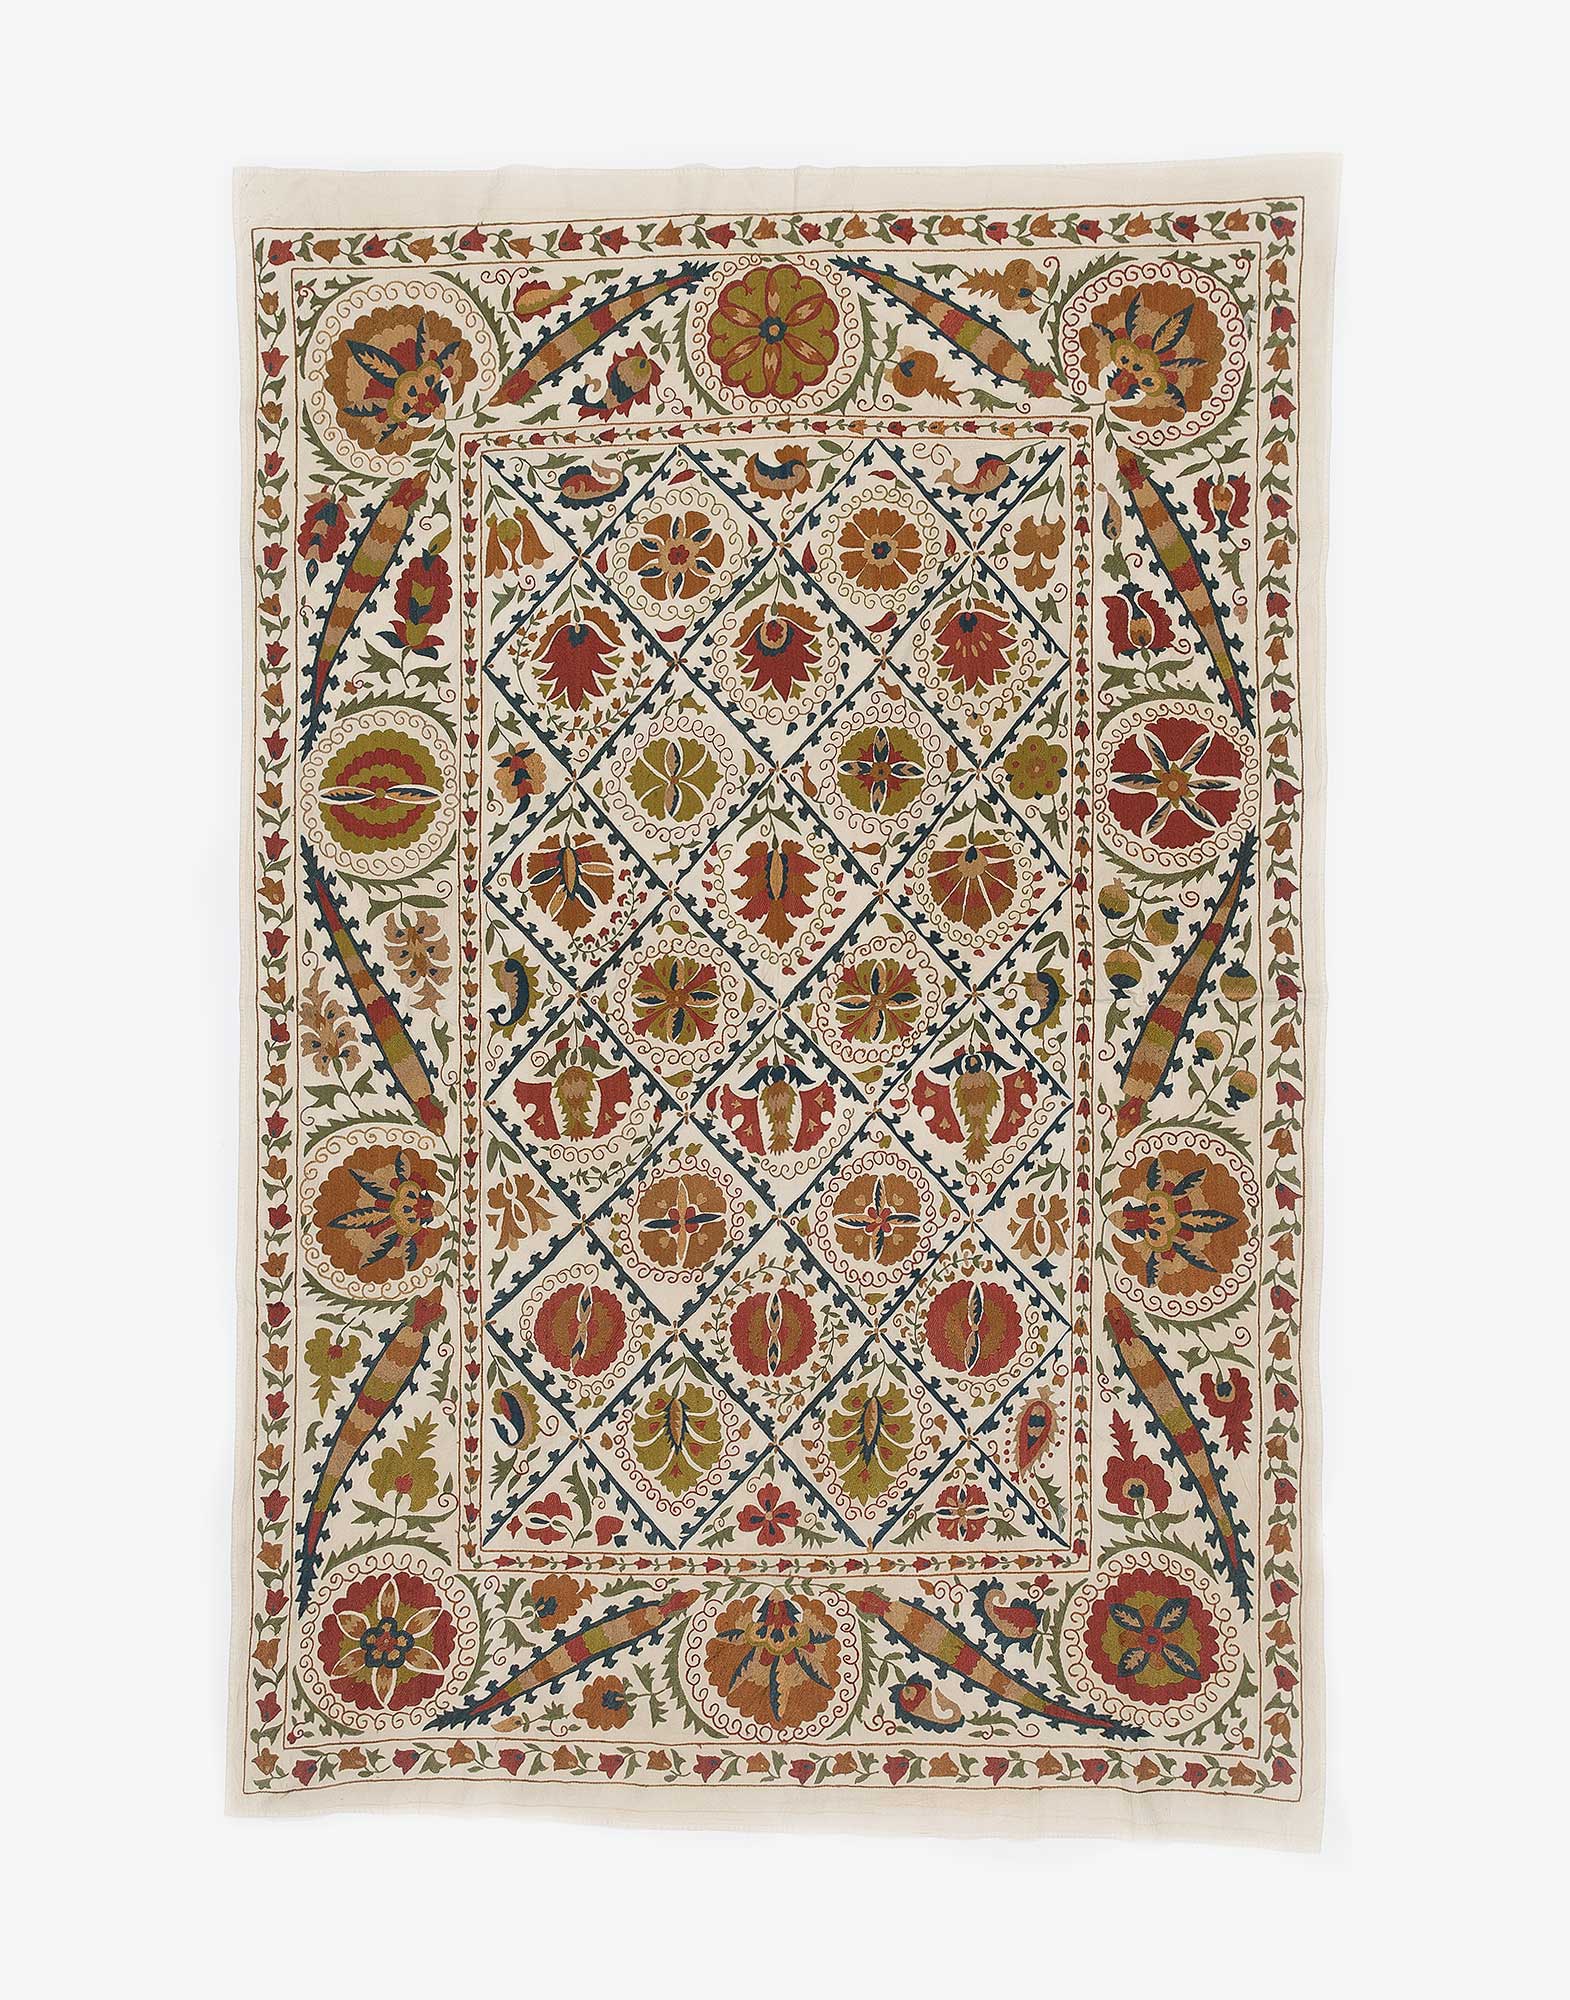 Uzbek Suzani Embroidered Bed Cover